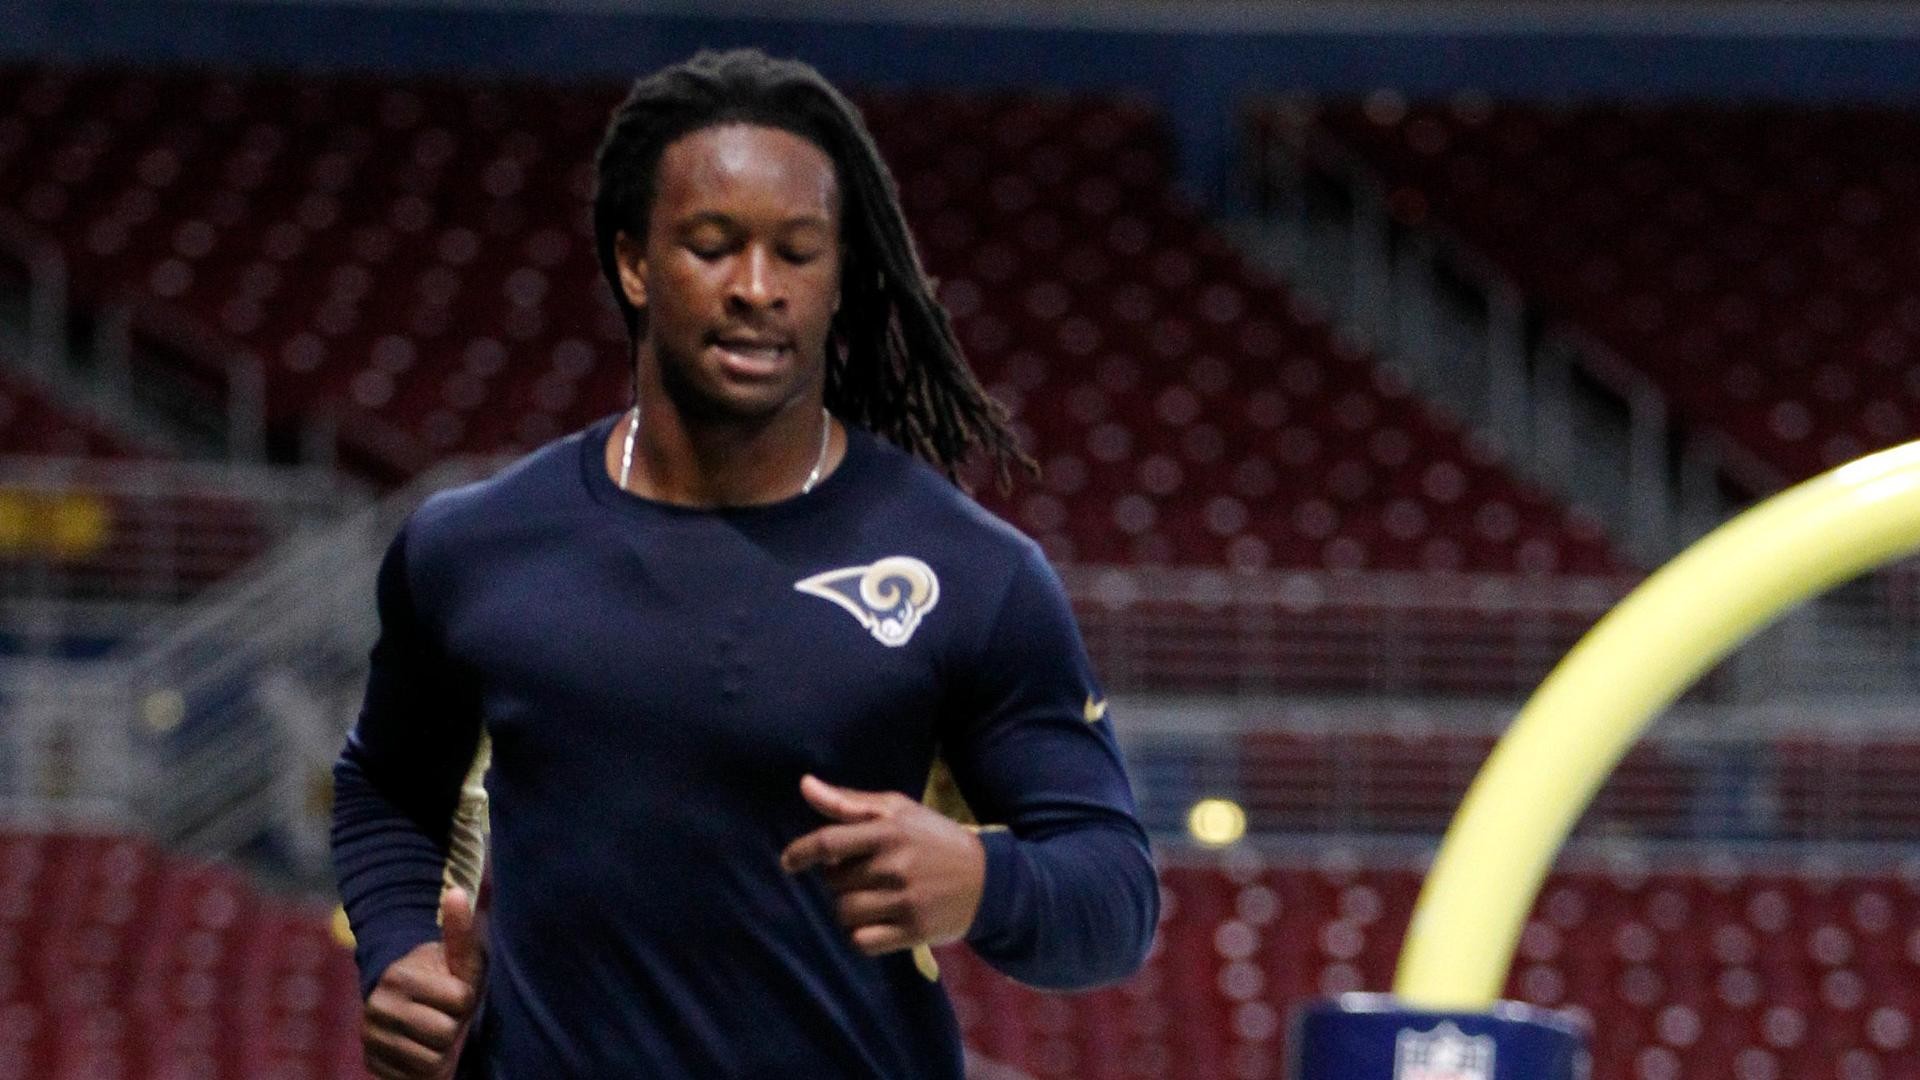 Todd Gurley to make NFL debut Sunday vs. Steelers